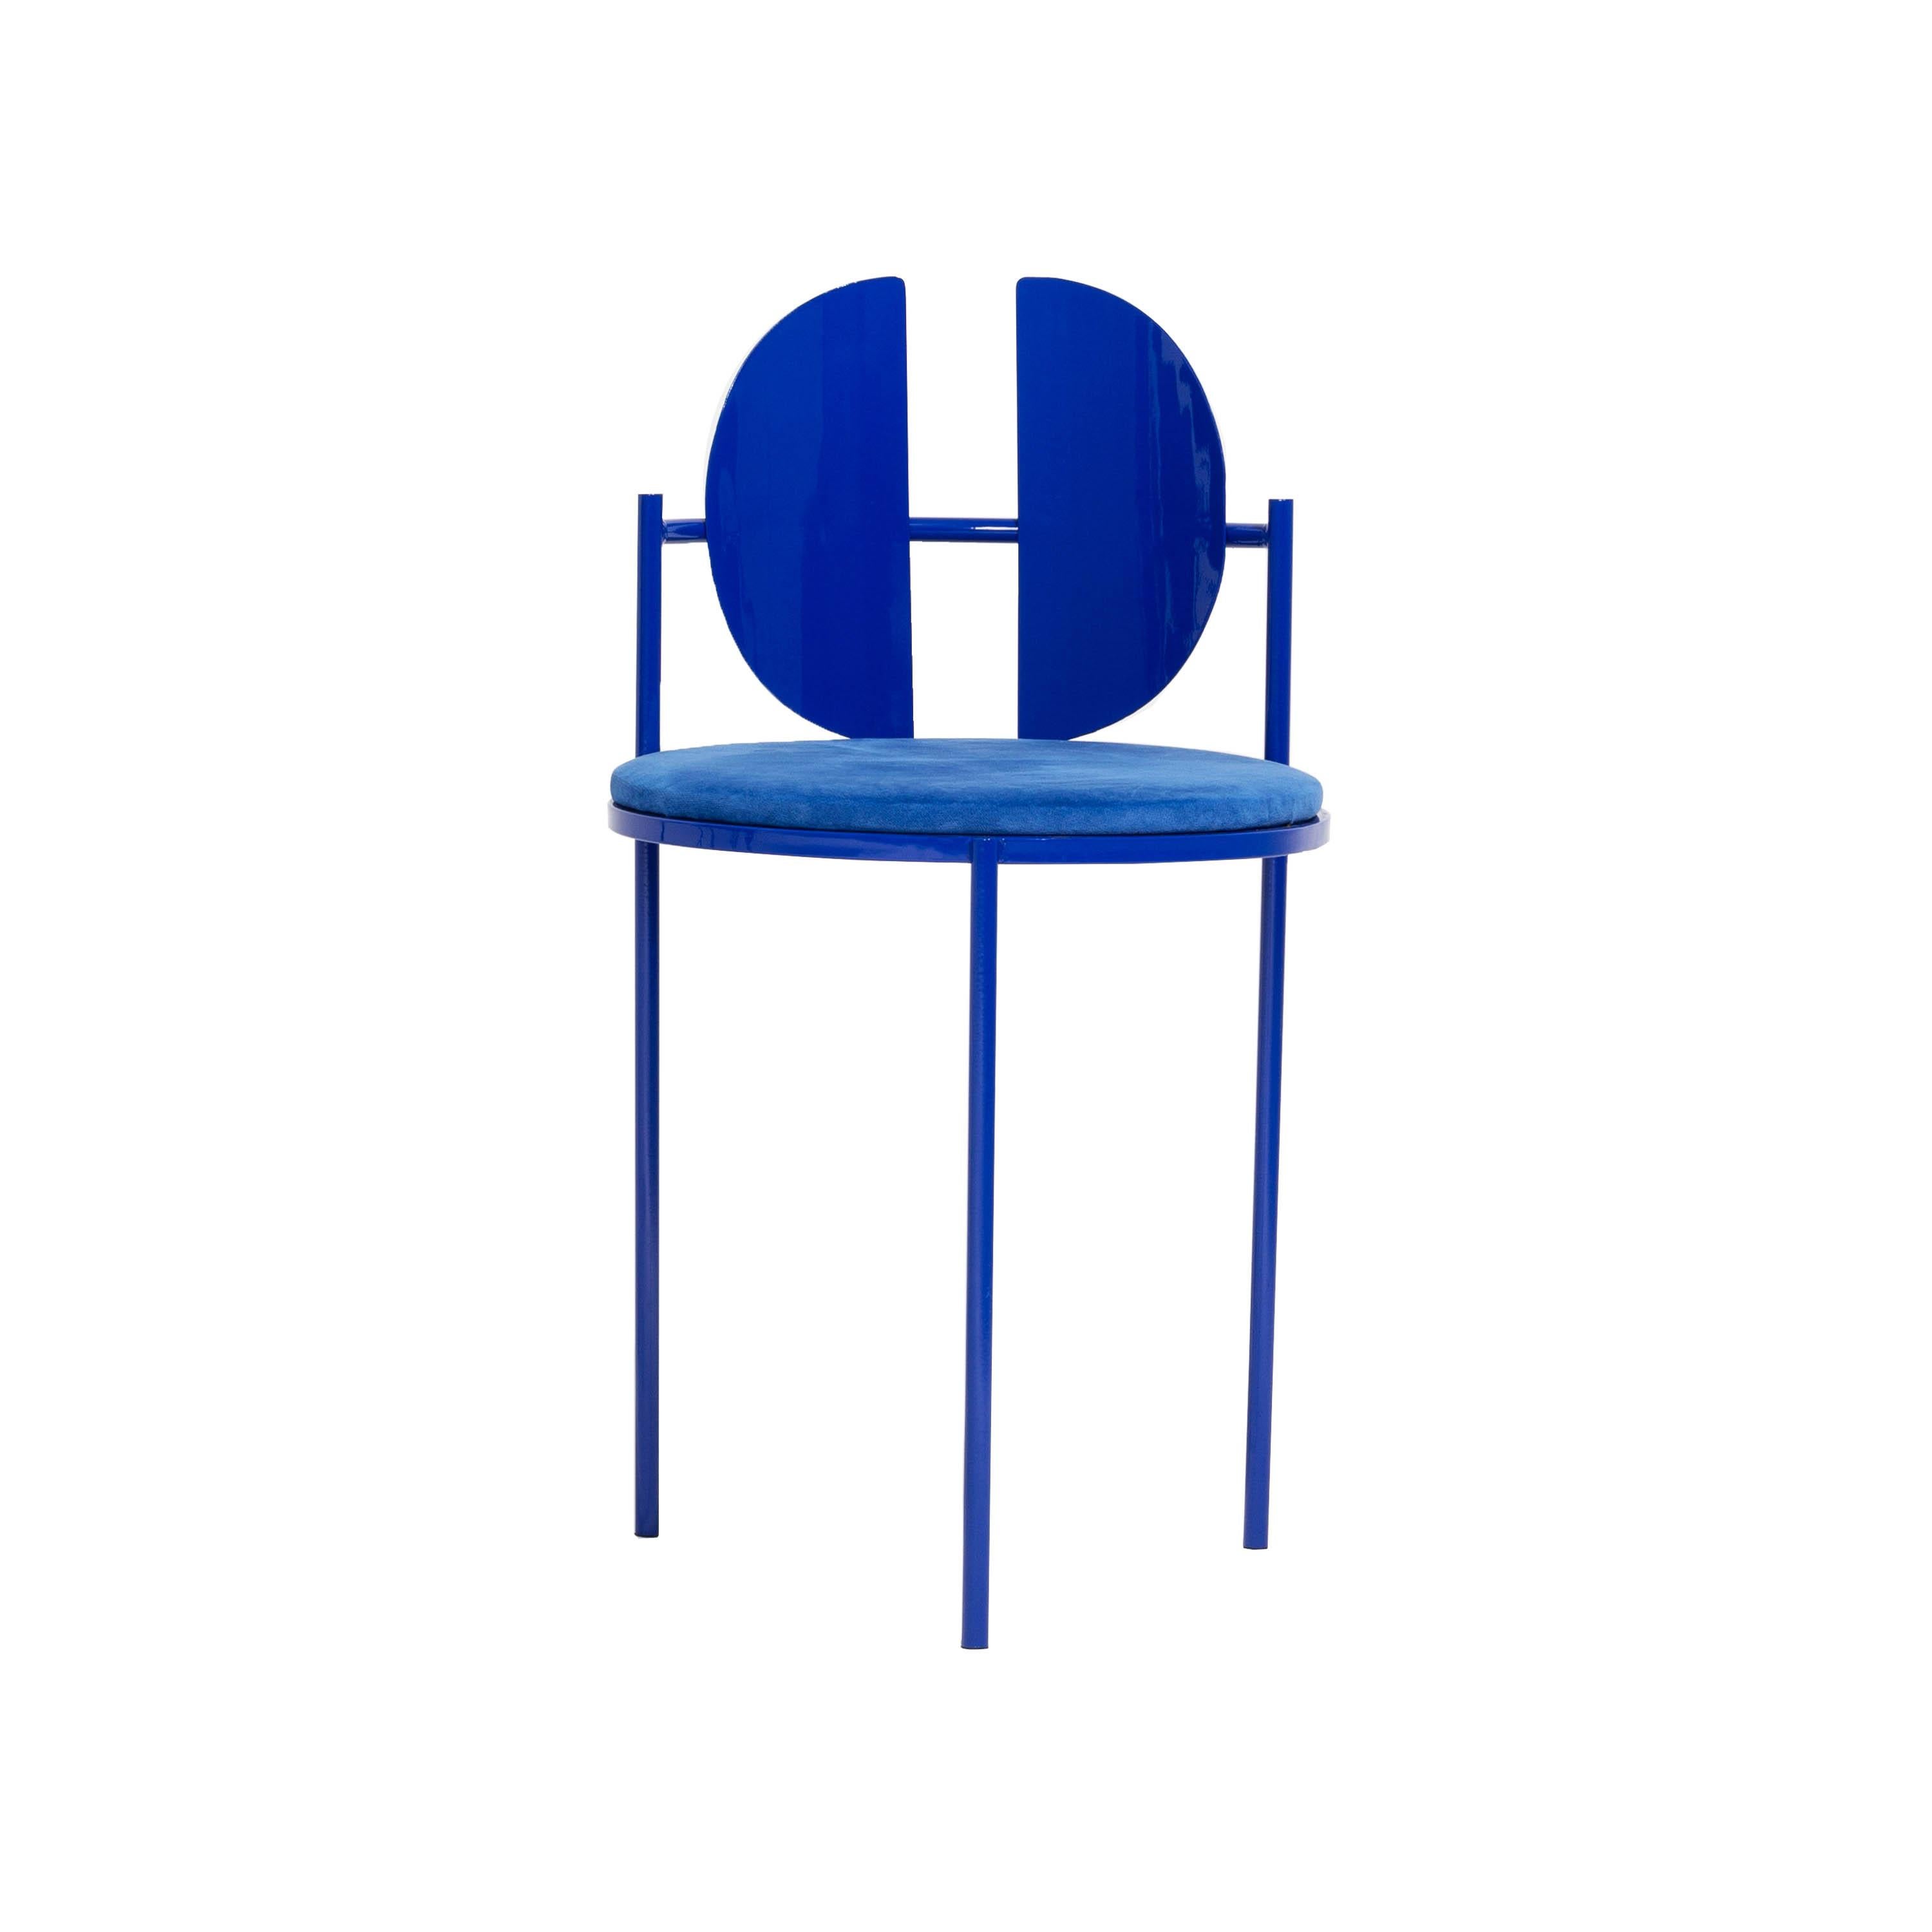 Contemporary dining chair designed by Armombiedro Studio. Metallic structure with blue lacquered finish. Upholstery on seat matching color.
 